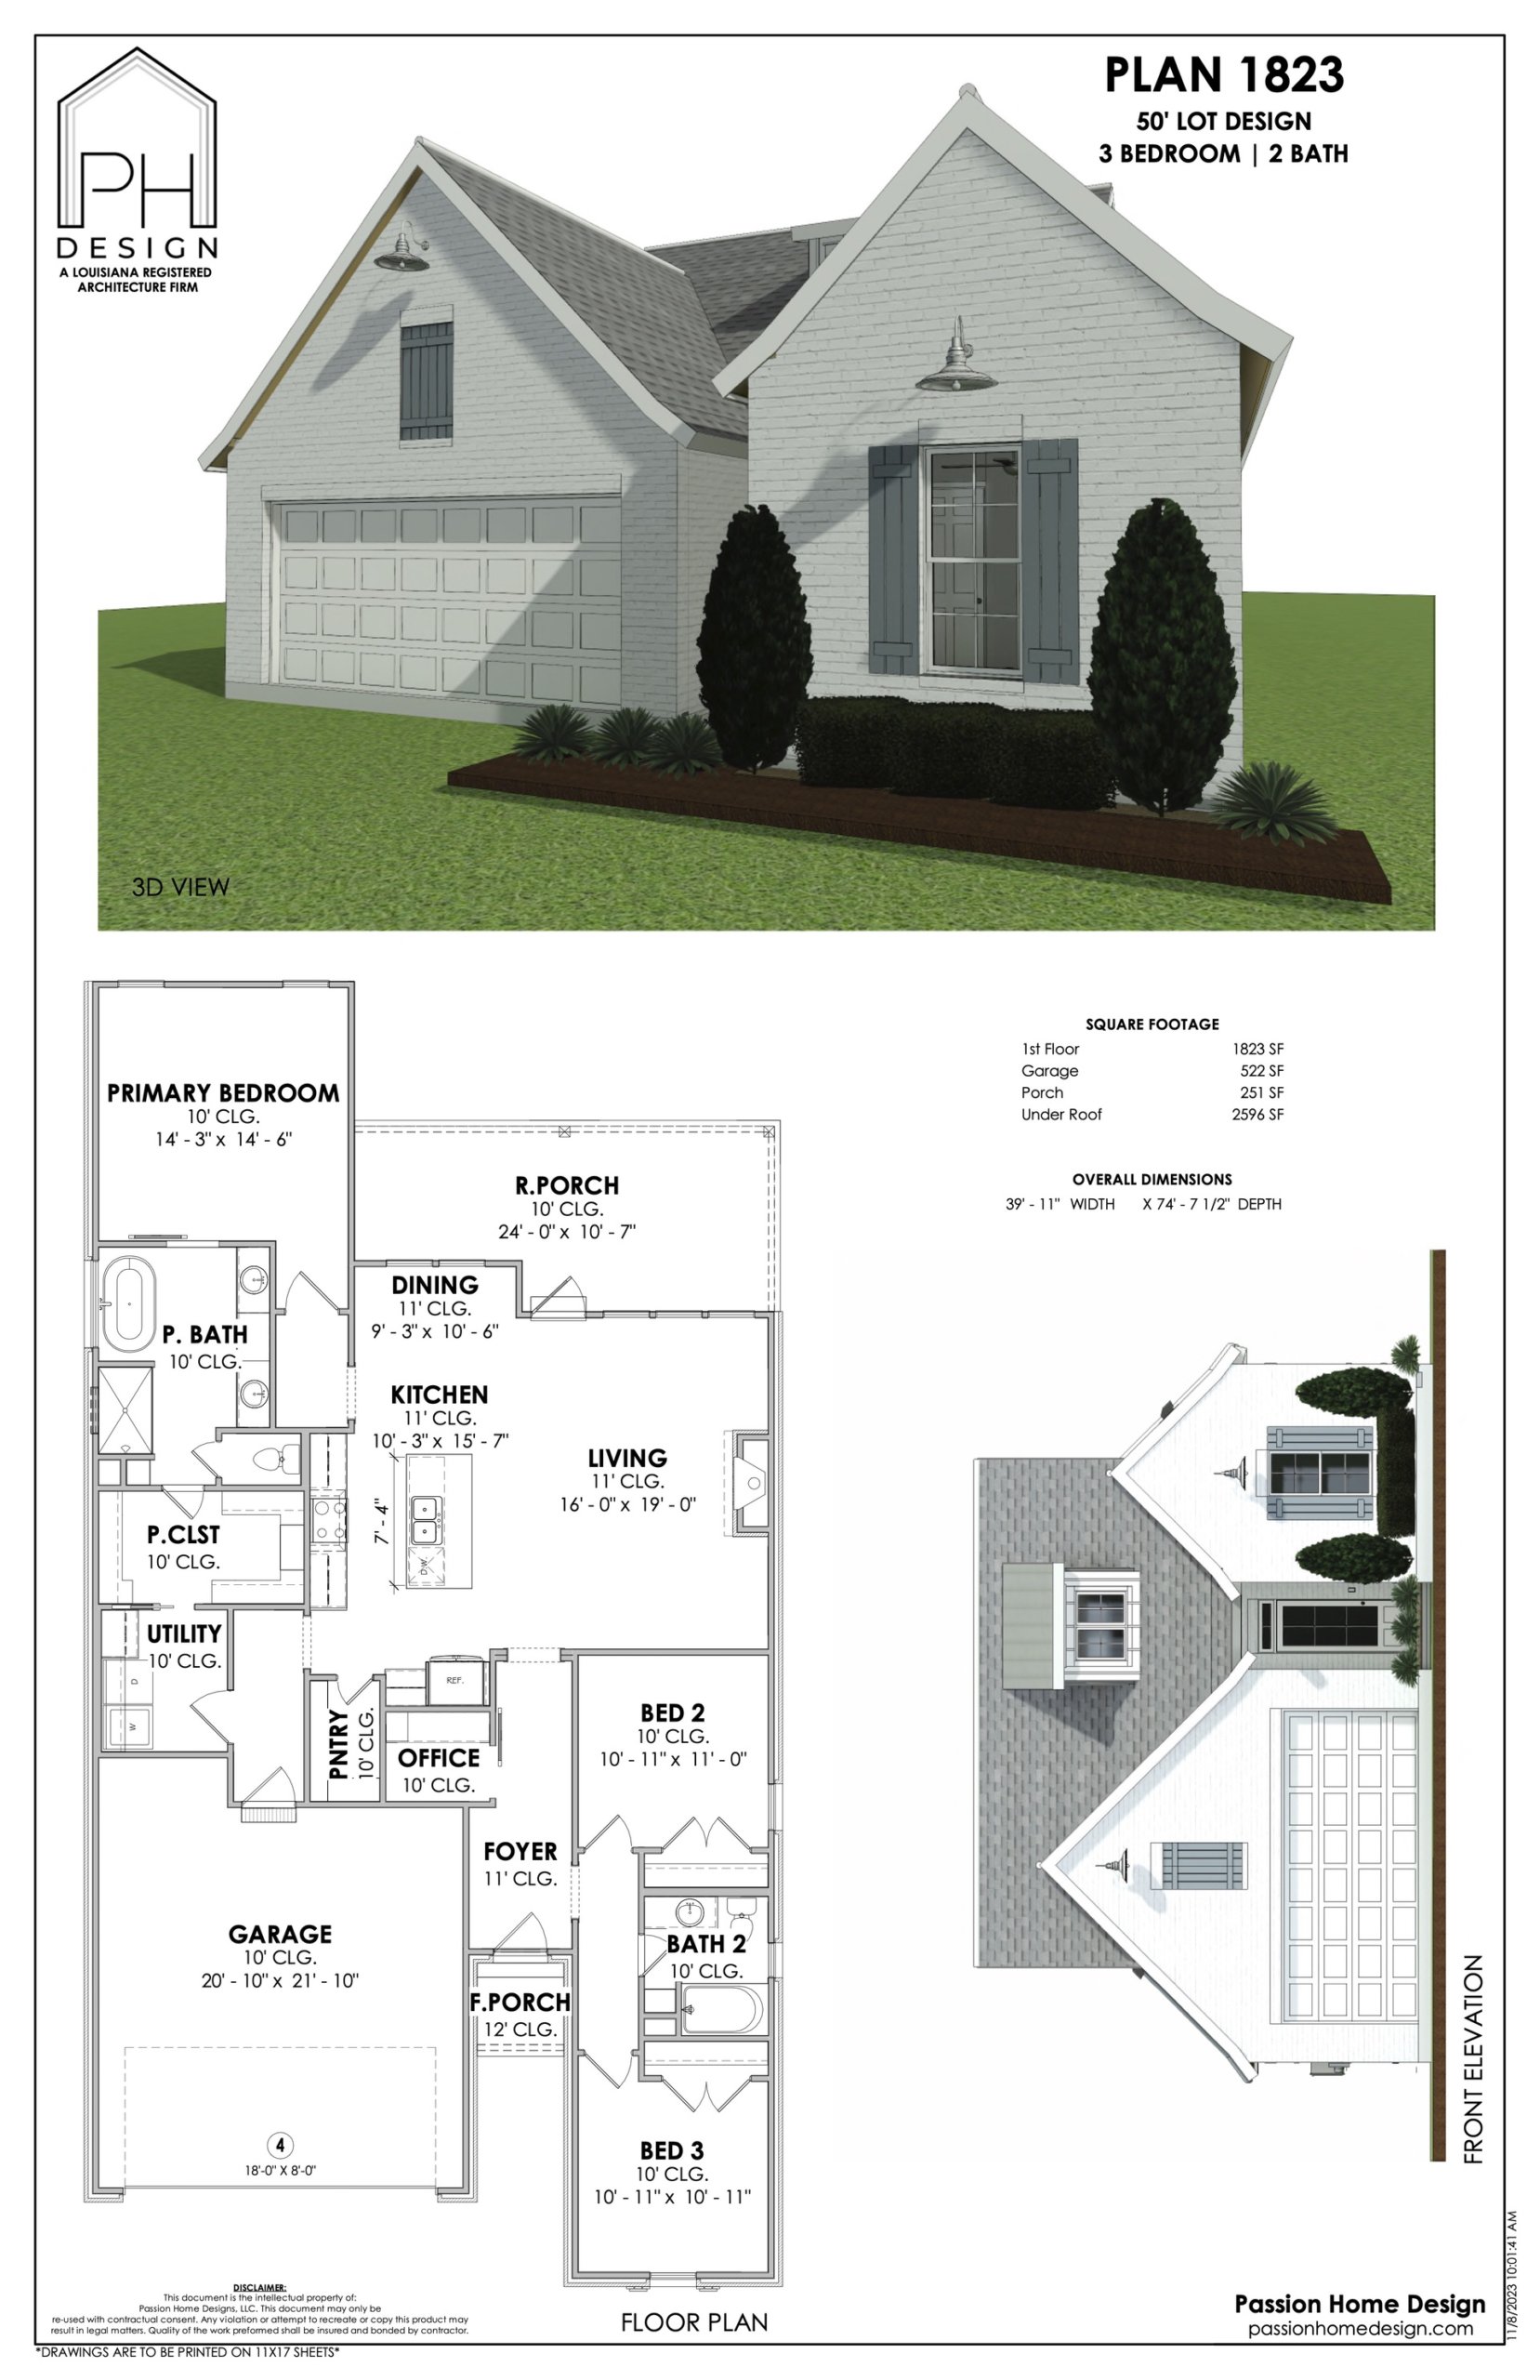 a floor plan for a home with two bedrooms and a garage.